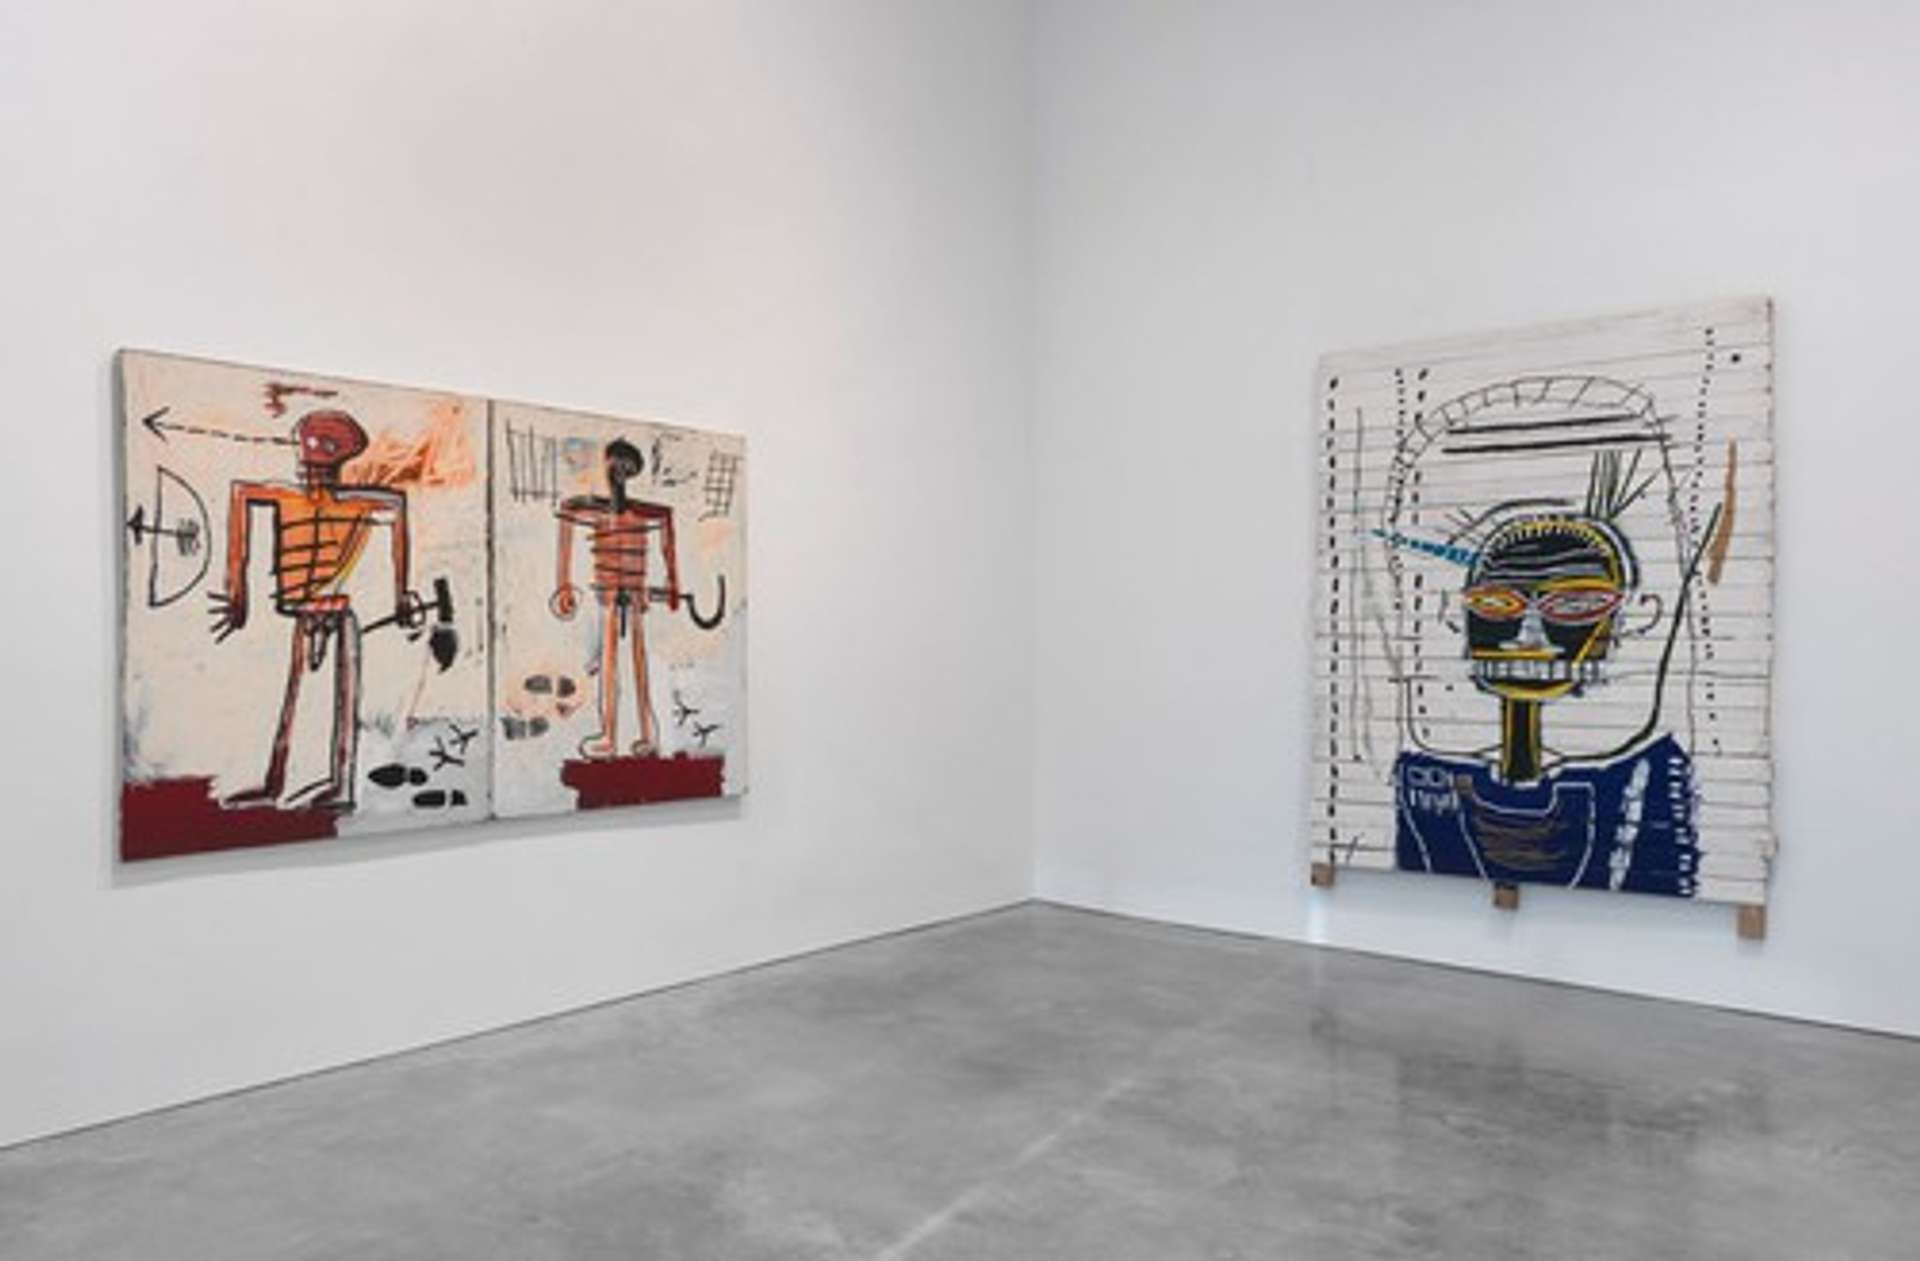  An image of one of Basquiat's exhibitions at the Gagosian, 2013.